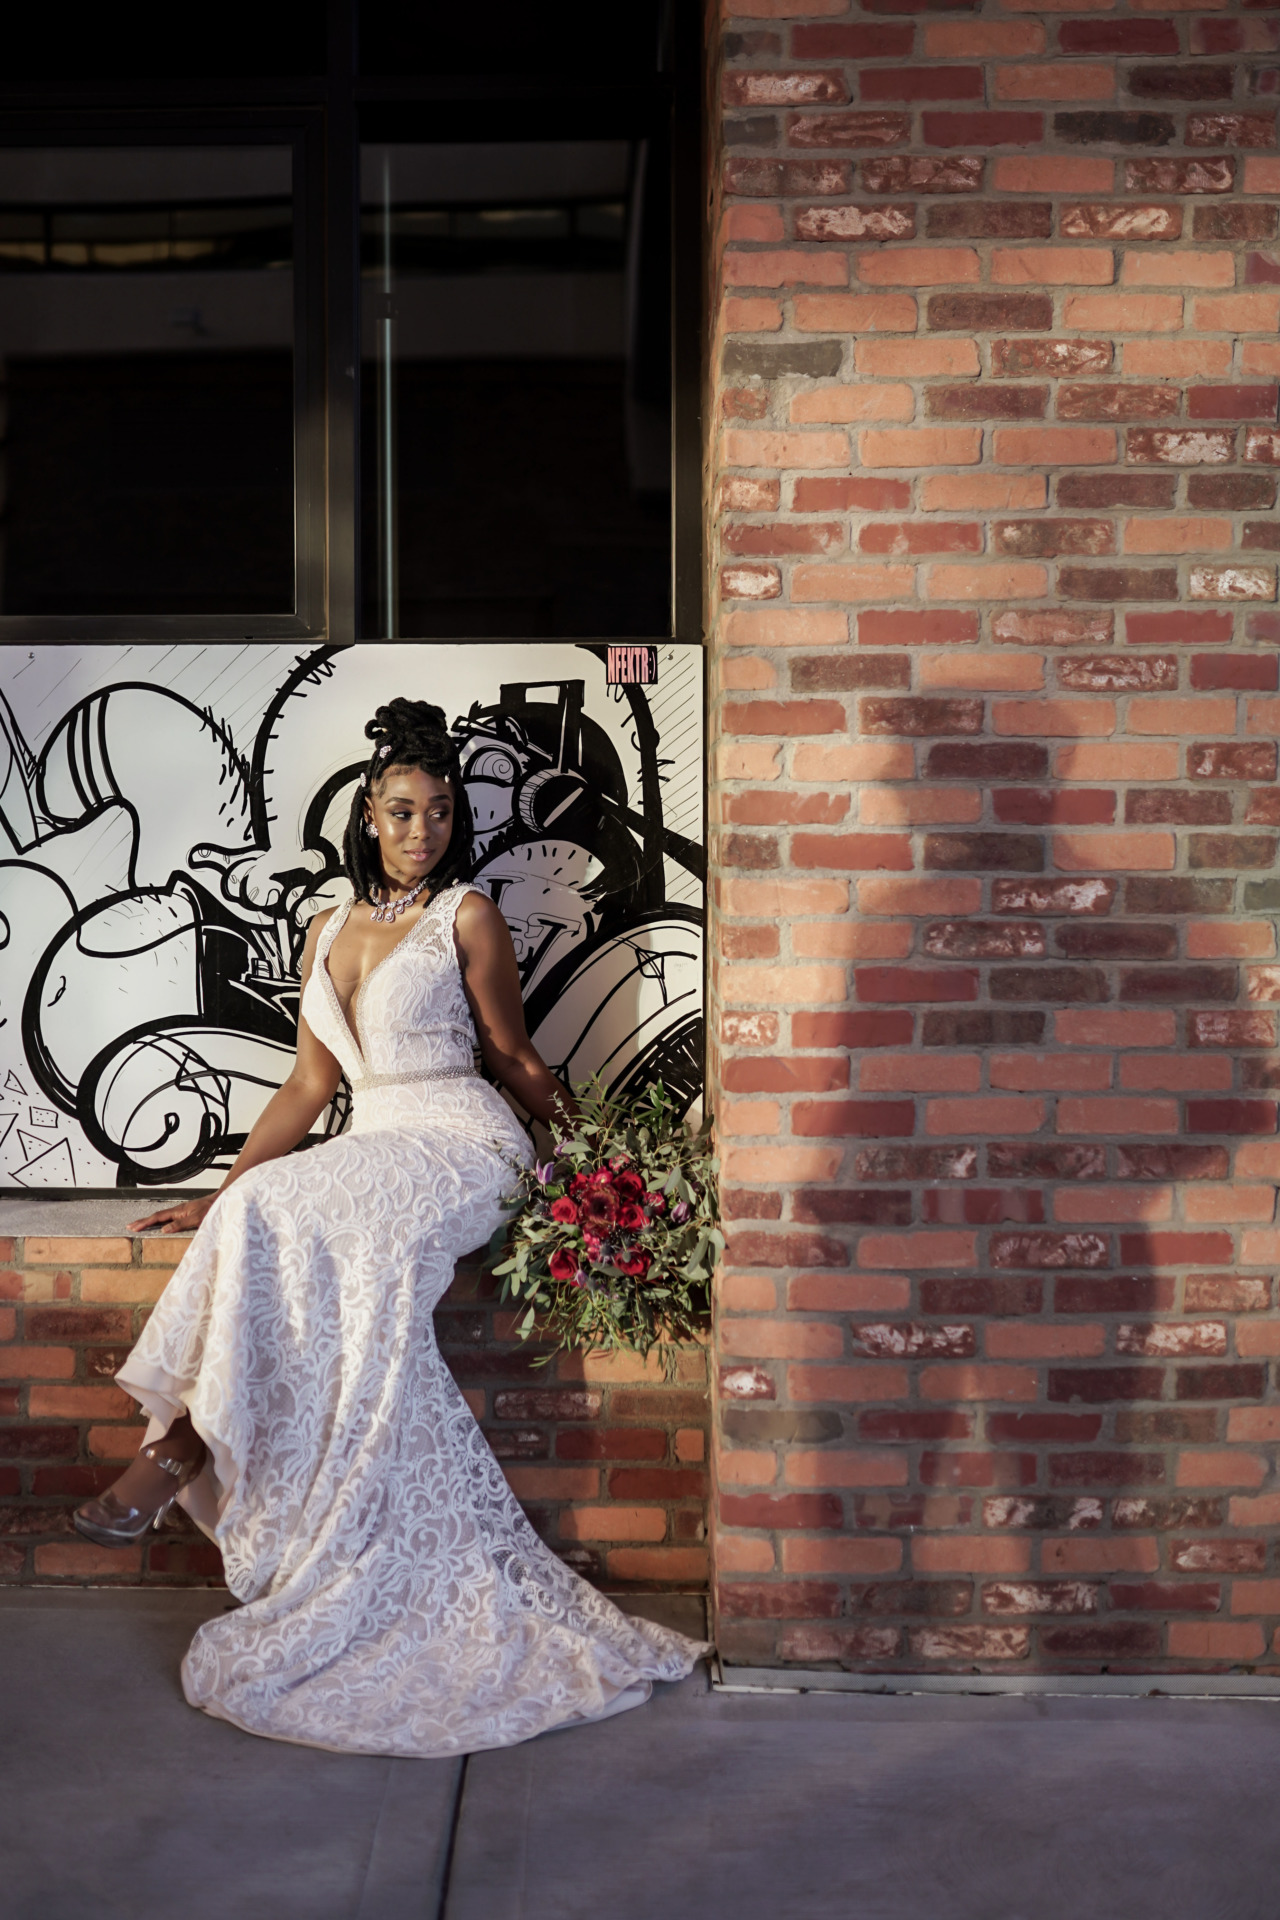 Luck be a Lady in This Downtown Las Vegas Wedding Fashion - Bridal  Spectacular